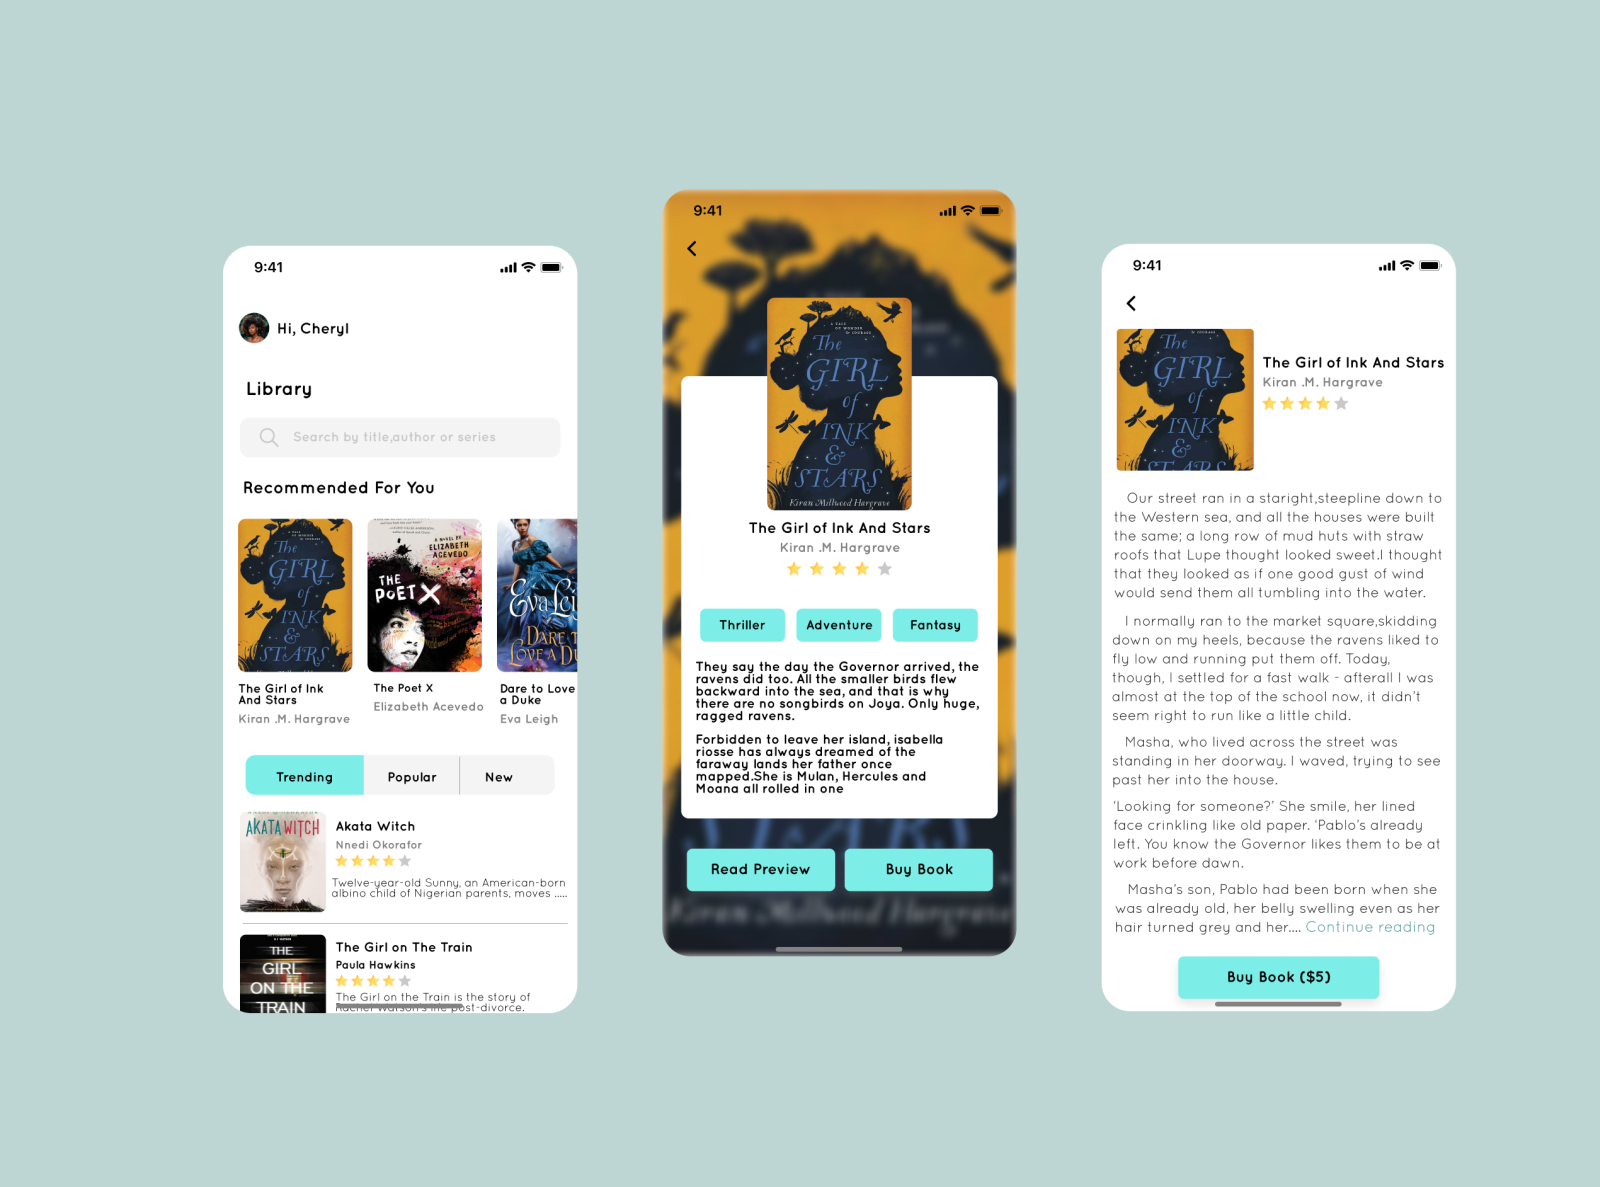  The image shows a mobile app's user interface for reading manhwa with features such as a library, trending, and popular sections, and a book reader with options to buy and read books.